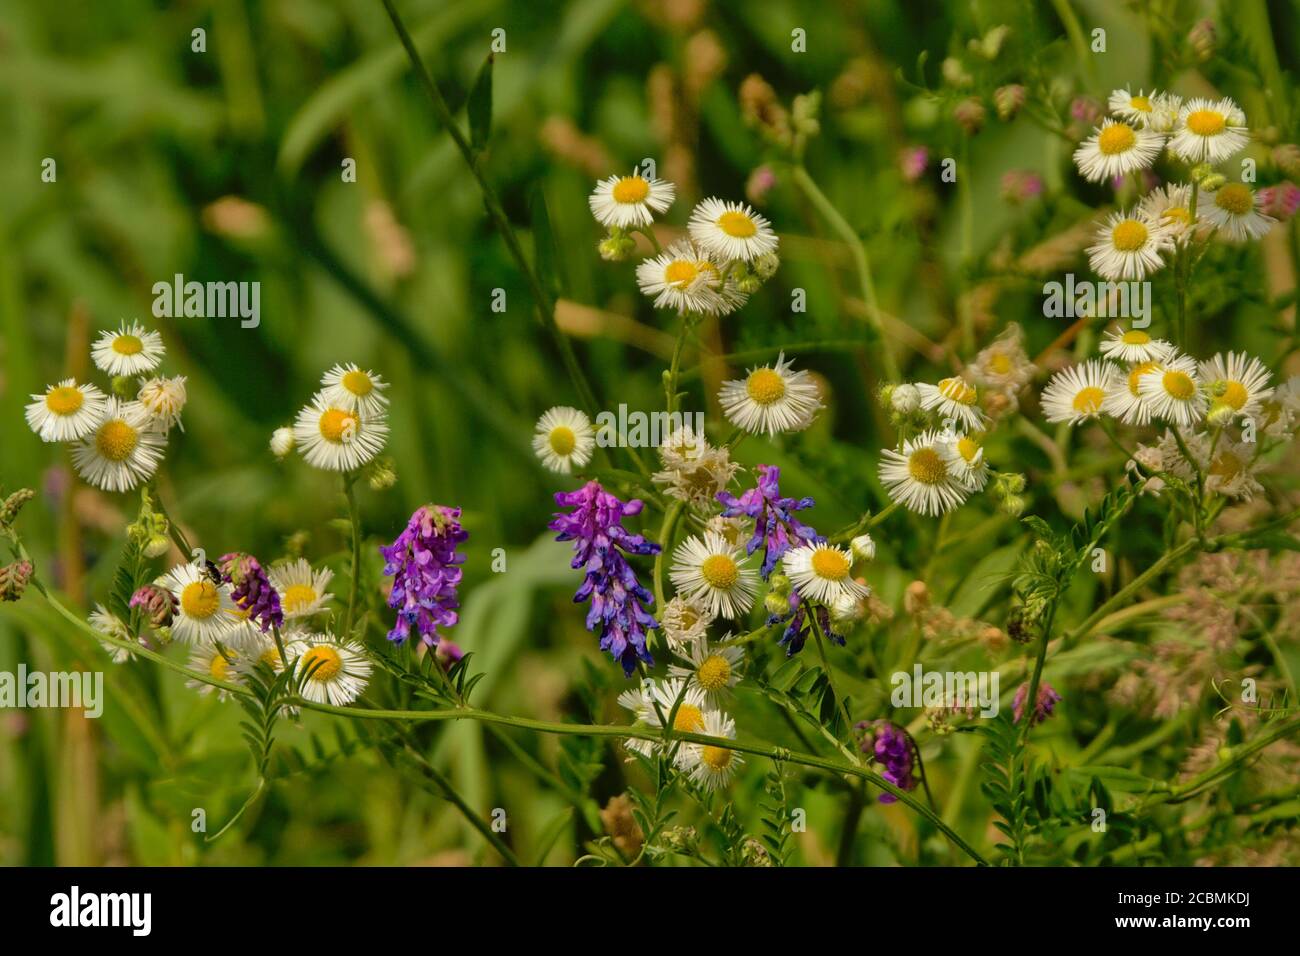 Purple vetch flowers and white and yellow daisies in a green field, selective focus Stock Photo